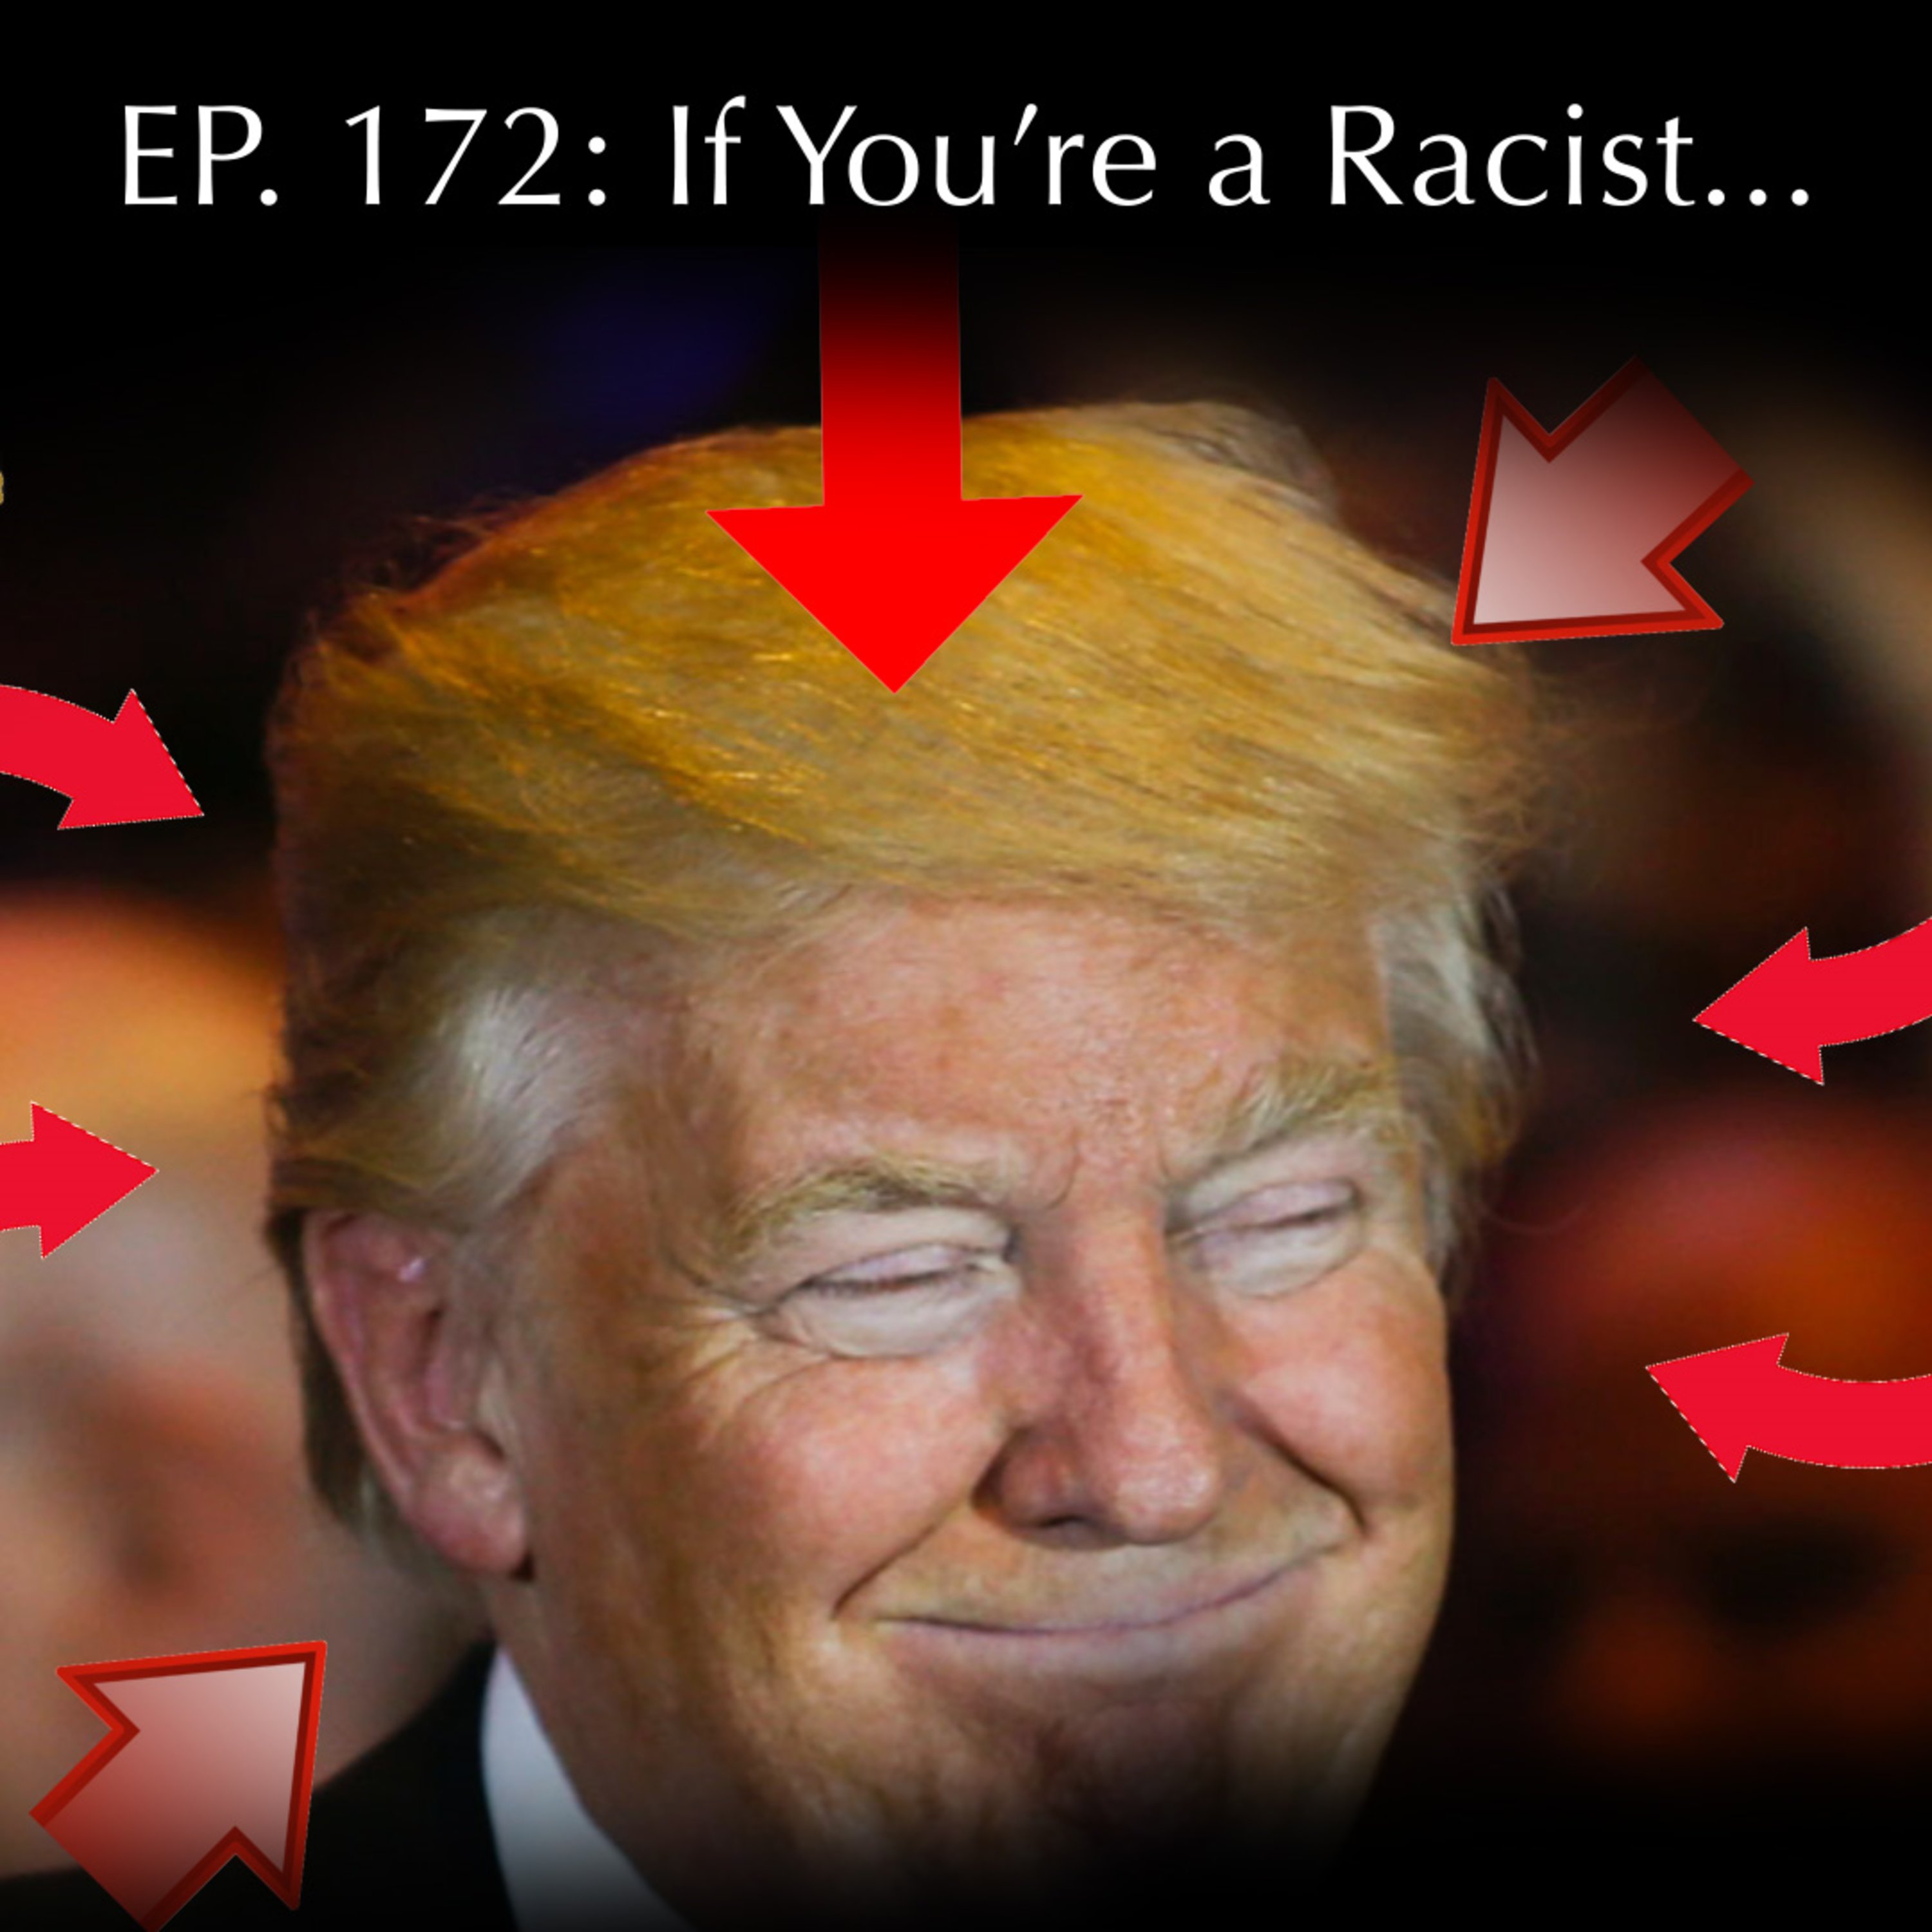 If You're a Racist: Ep 172